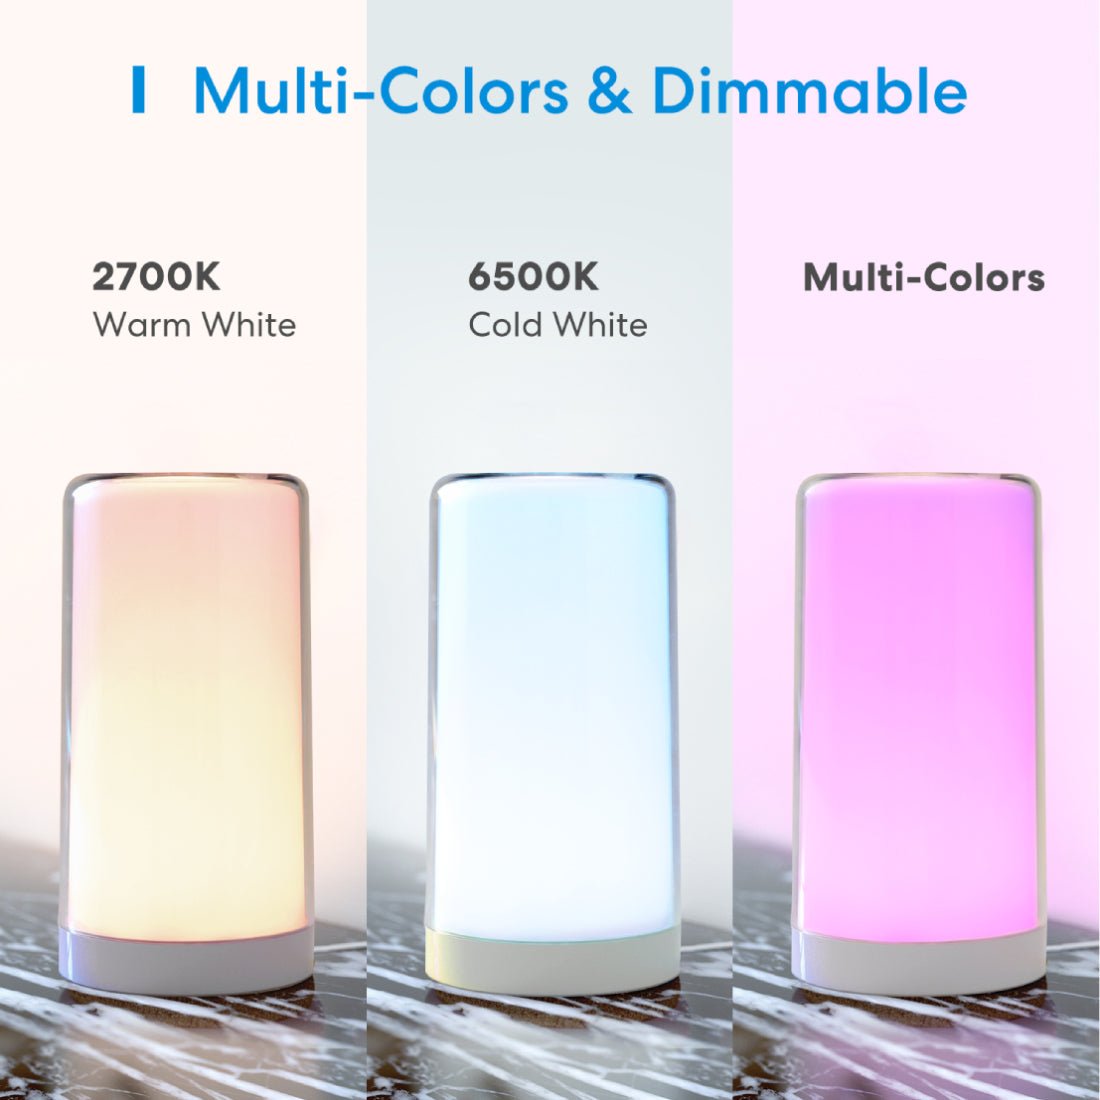 Meross Smart Wi-Fi Ambient Light with RGB - إضاءة - Store 974 | ستور ٩٧٤